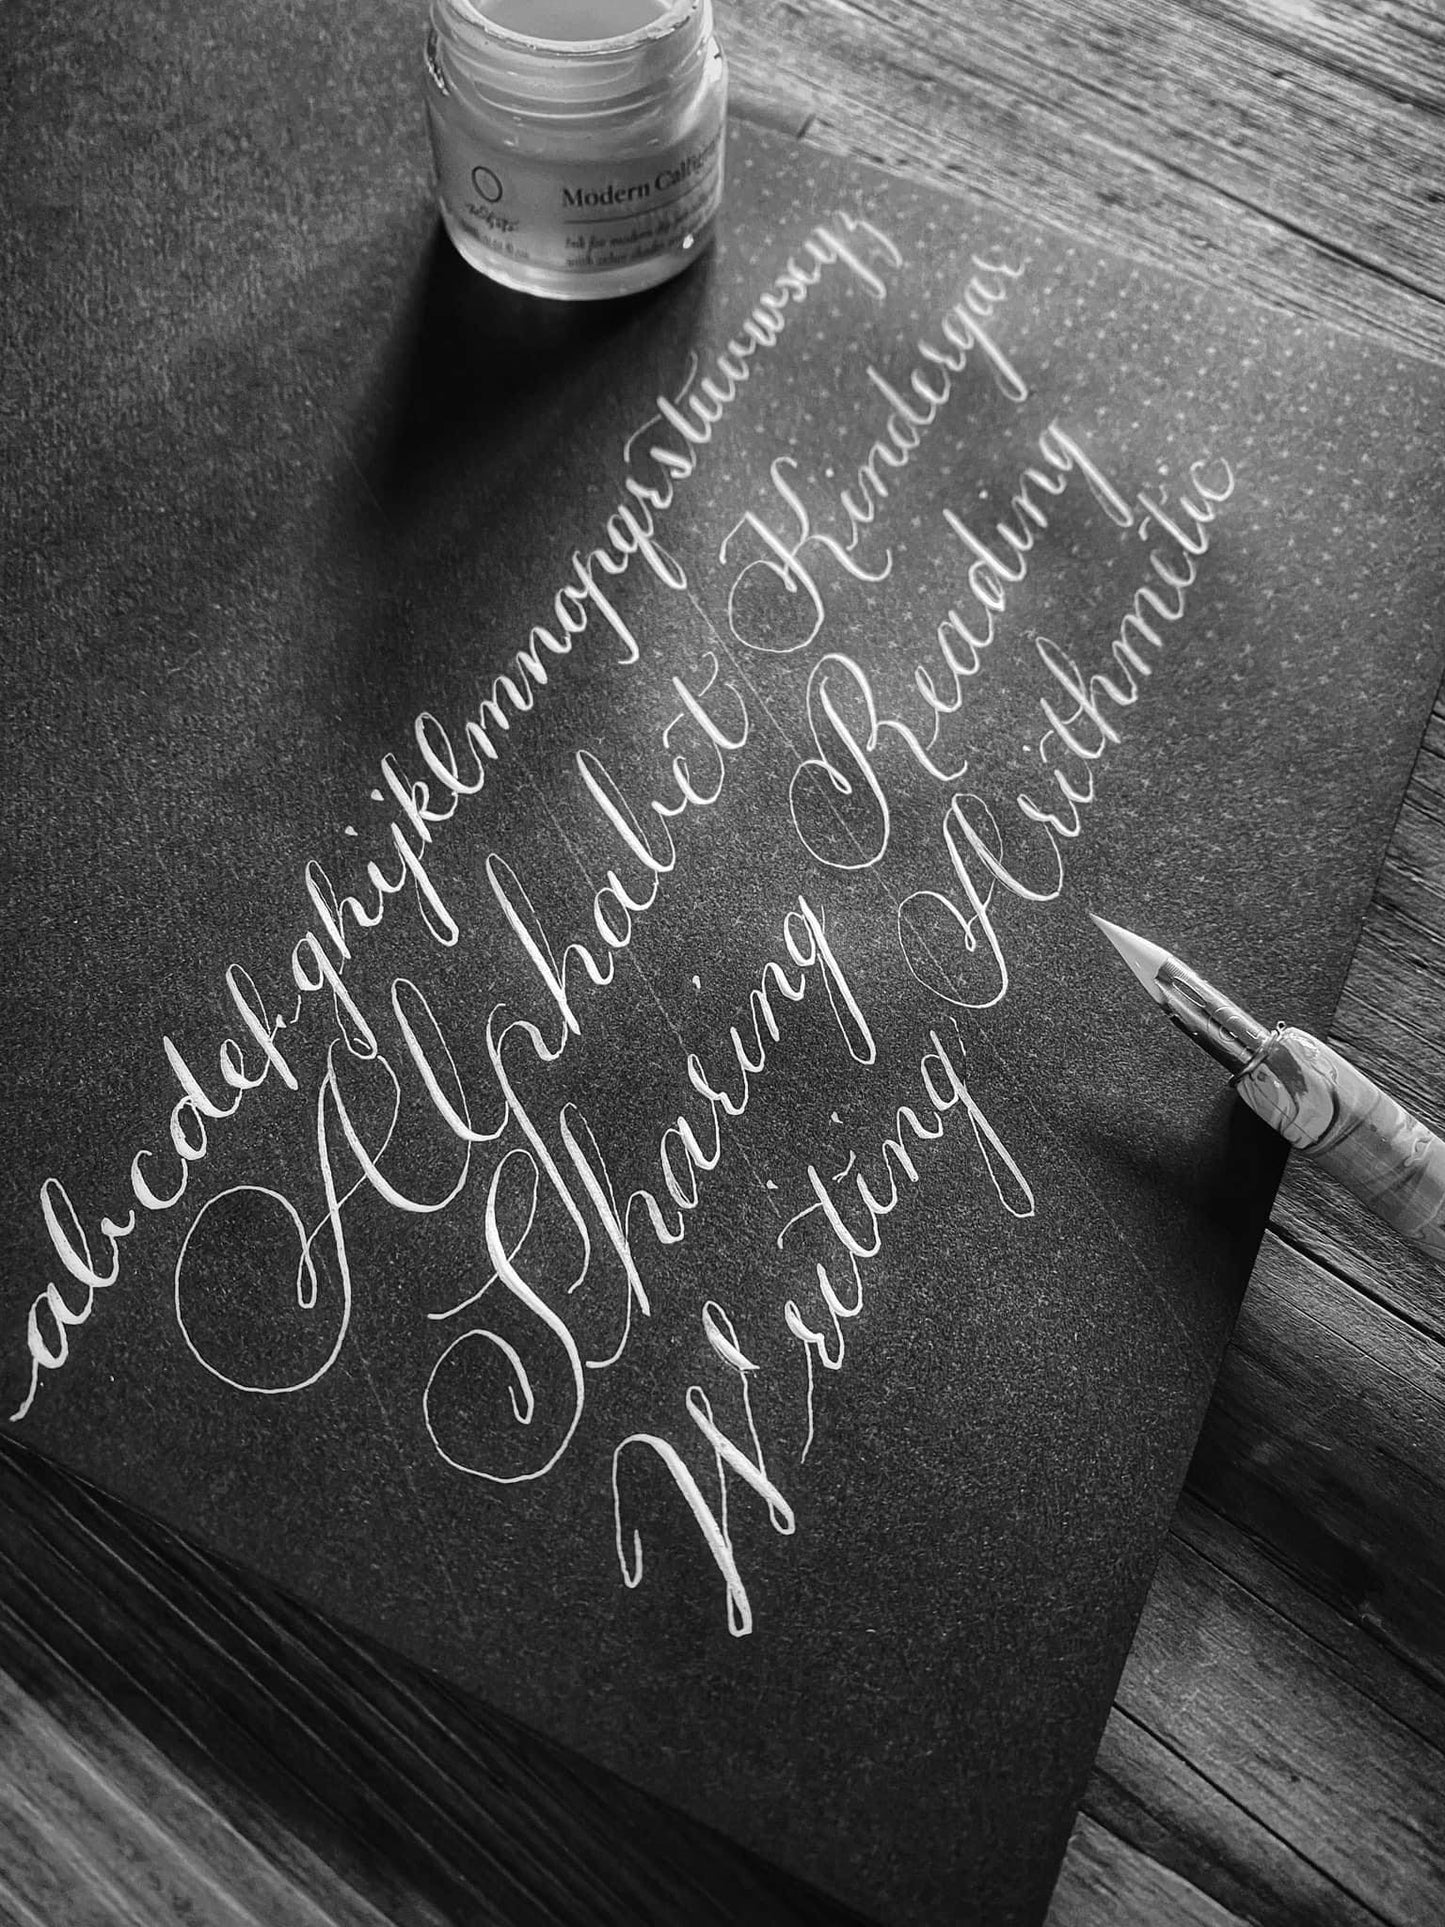 Copperplate Calligraphy - An Introductory Class to the Basics - July 23rd 12pm-2pm